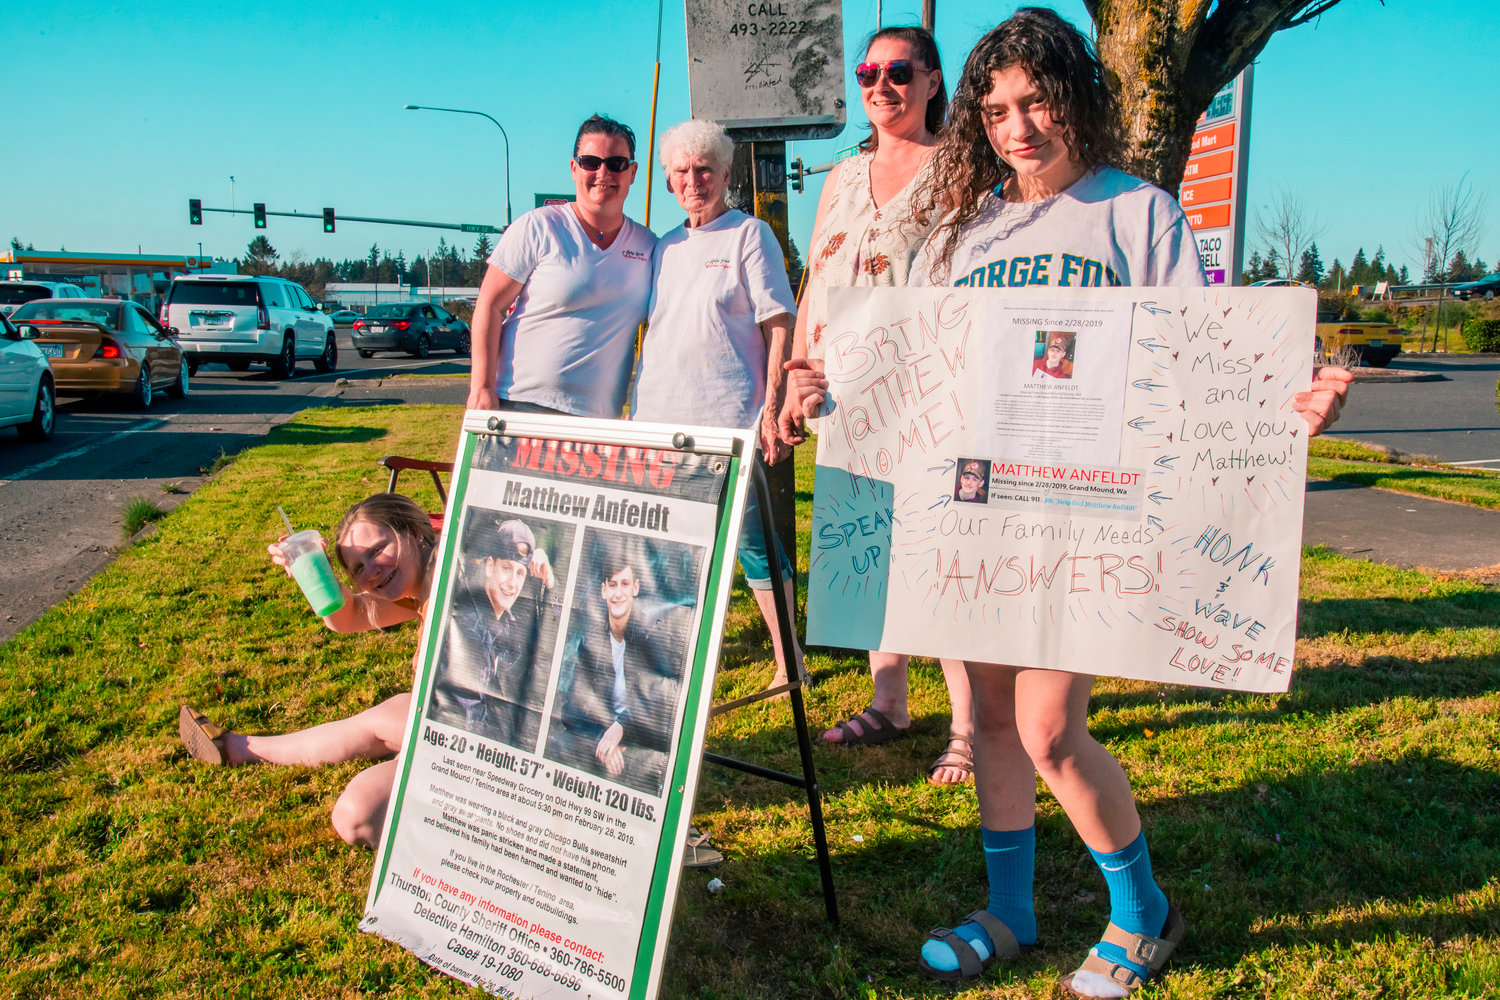 From left, Cheyenne and Sarah Anfeldt, Shirley Tax, Icy Counts and Elena Kaye hold signs to bring awareness for the missing Matthew Anfeldt during a honk-and-wave event in Grand Mound on Saturday. Attendees gathered at the park-and-ride on Southwest Tenino Grand Mound Road and held signs and fliers with information on three unsolved missing or murdered victims: Anfeldt, Logan Schiendelman and Karen Bodine. Anfeldt was last seen at the Speedway Grocery on Old Highway 99 in Grand Mound just before 5:30 p.m. on Feb. 28, 2019. Shiendelman was last seen by his grandmother on May 19, 2016, at their home in Tumwater. Later that same day, his car, a black 1996 Chrysler Sebring convertible, was towed from the shoulder of southbound Interstate 5 near milepost 92. Bodine was found dead at the entrance to a gravel pit off of Little Rock Road Southwest in Rochester on Jan. 22, 2007.